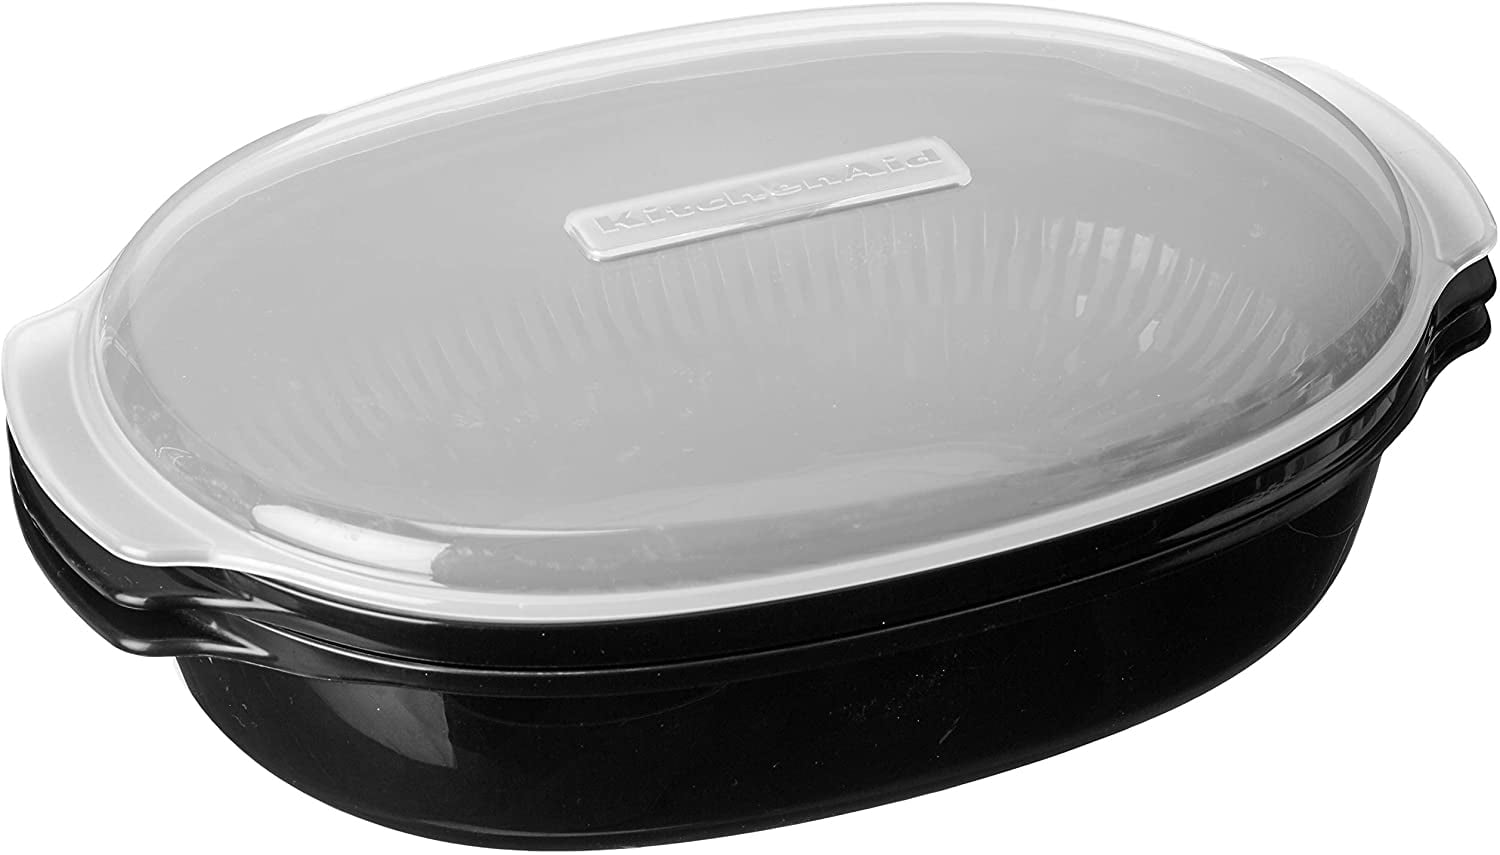 Mainstays Silicone Steamer Easy Nonstick Cooking For Stove Or Microwave Oven 